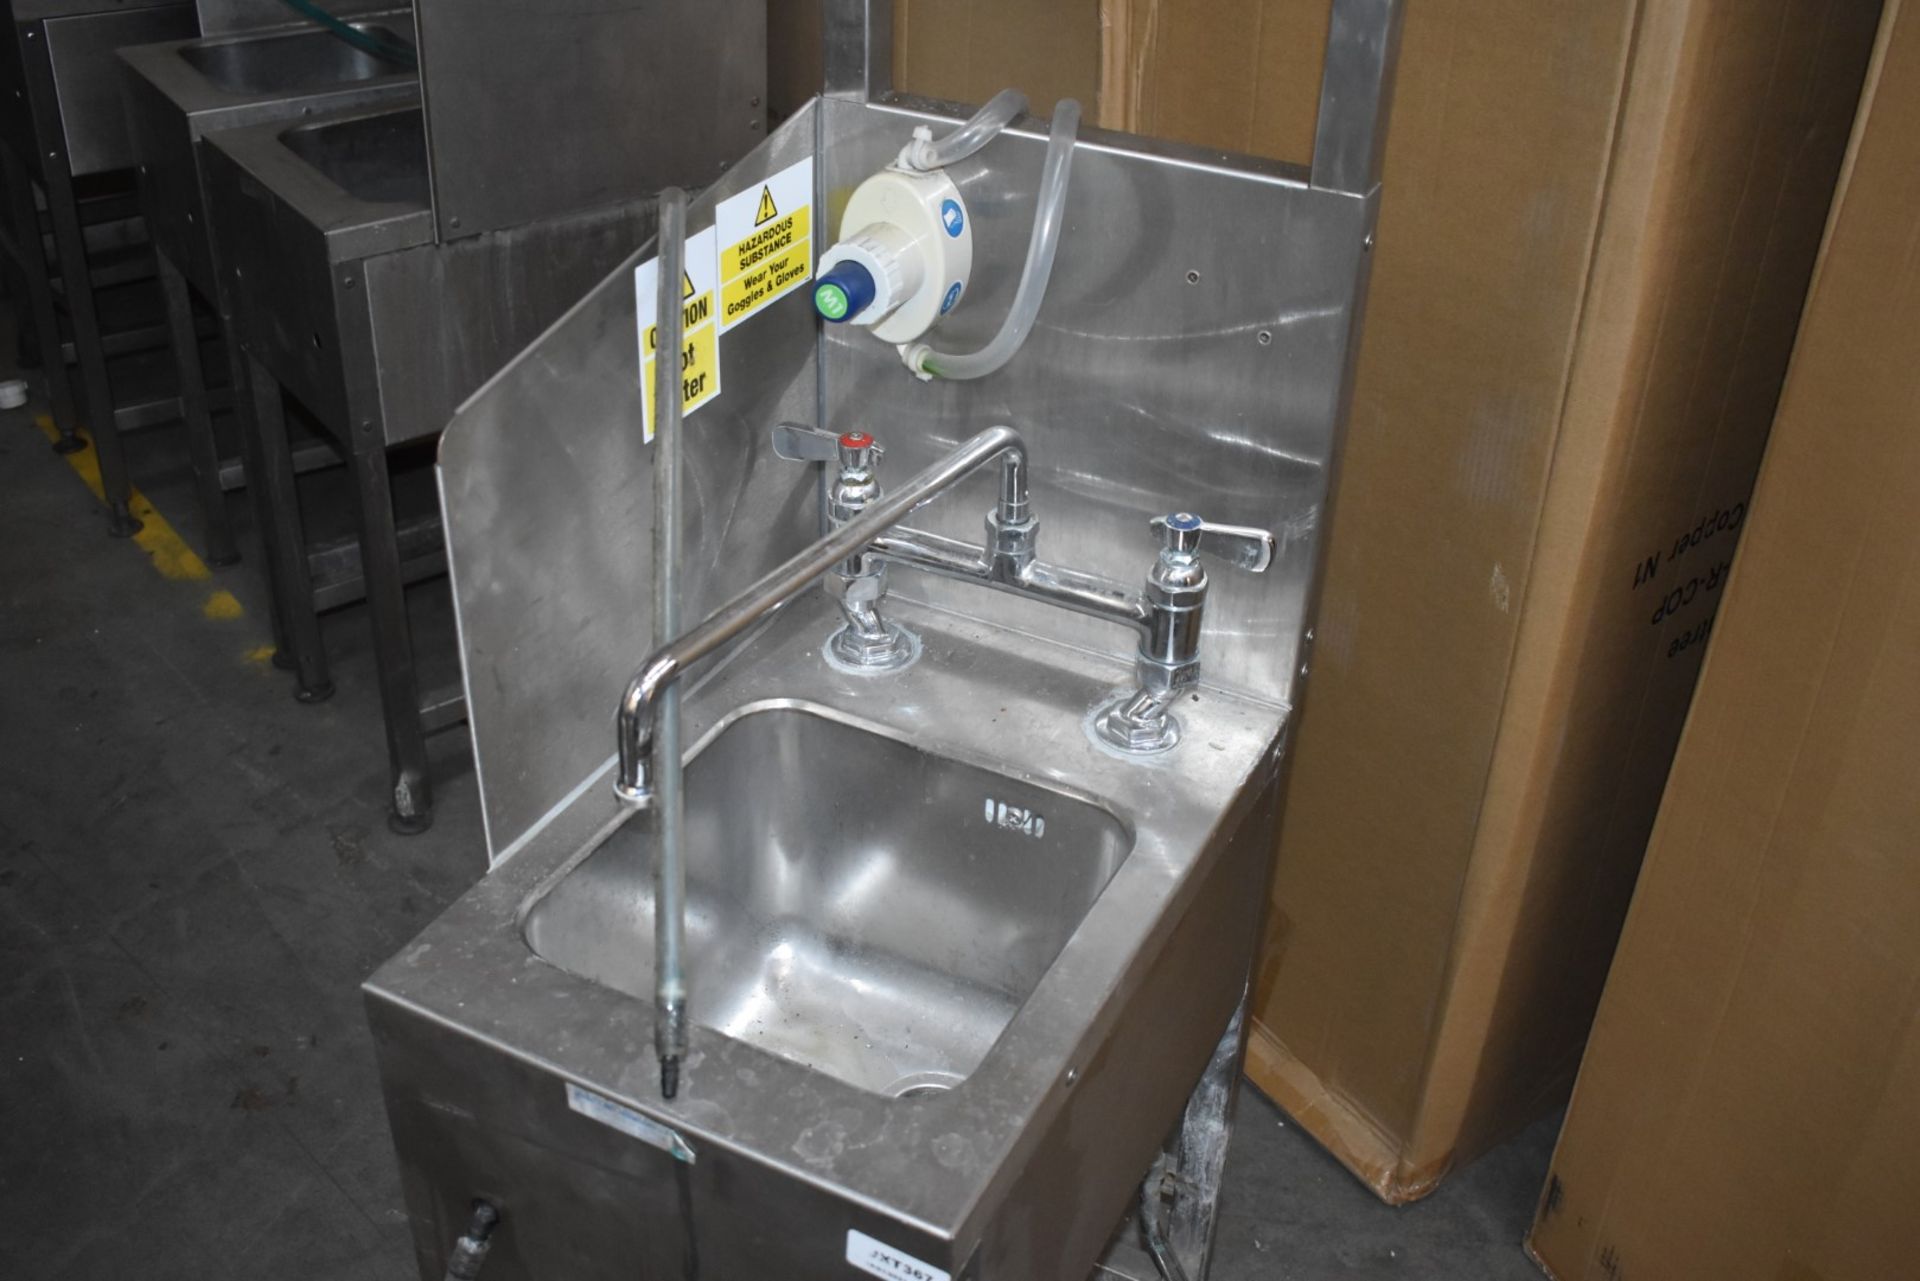 1 x Slim Janitorial Wash Station - Features Wash Bowl, Mop Hanger, Goggle Hook, Detergent Pump & Tap - Image 4 of 5